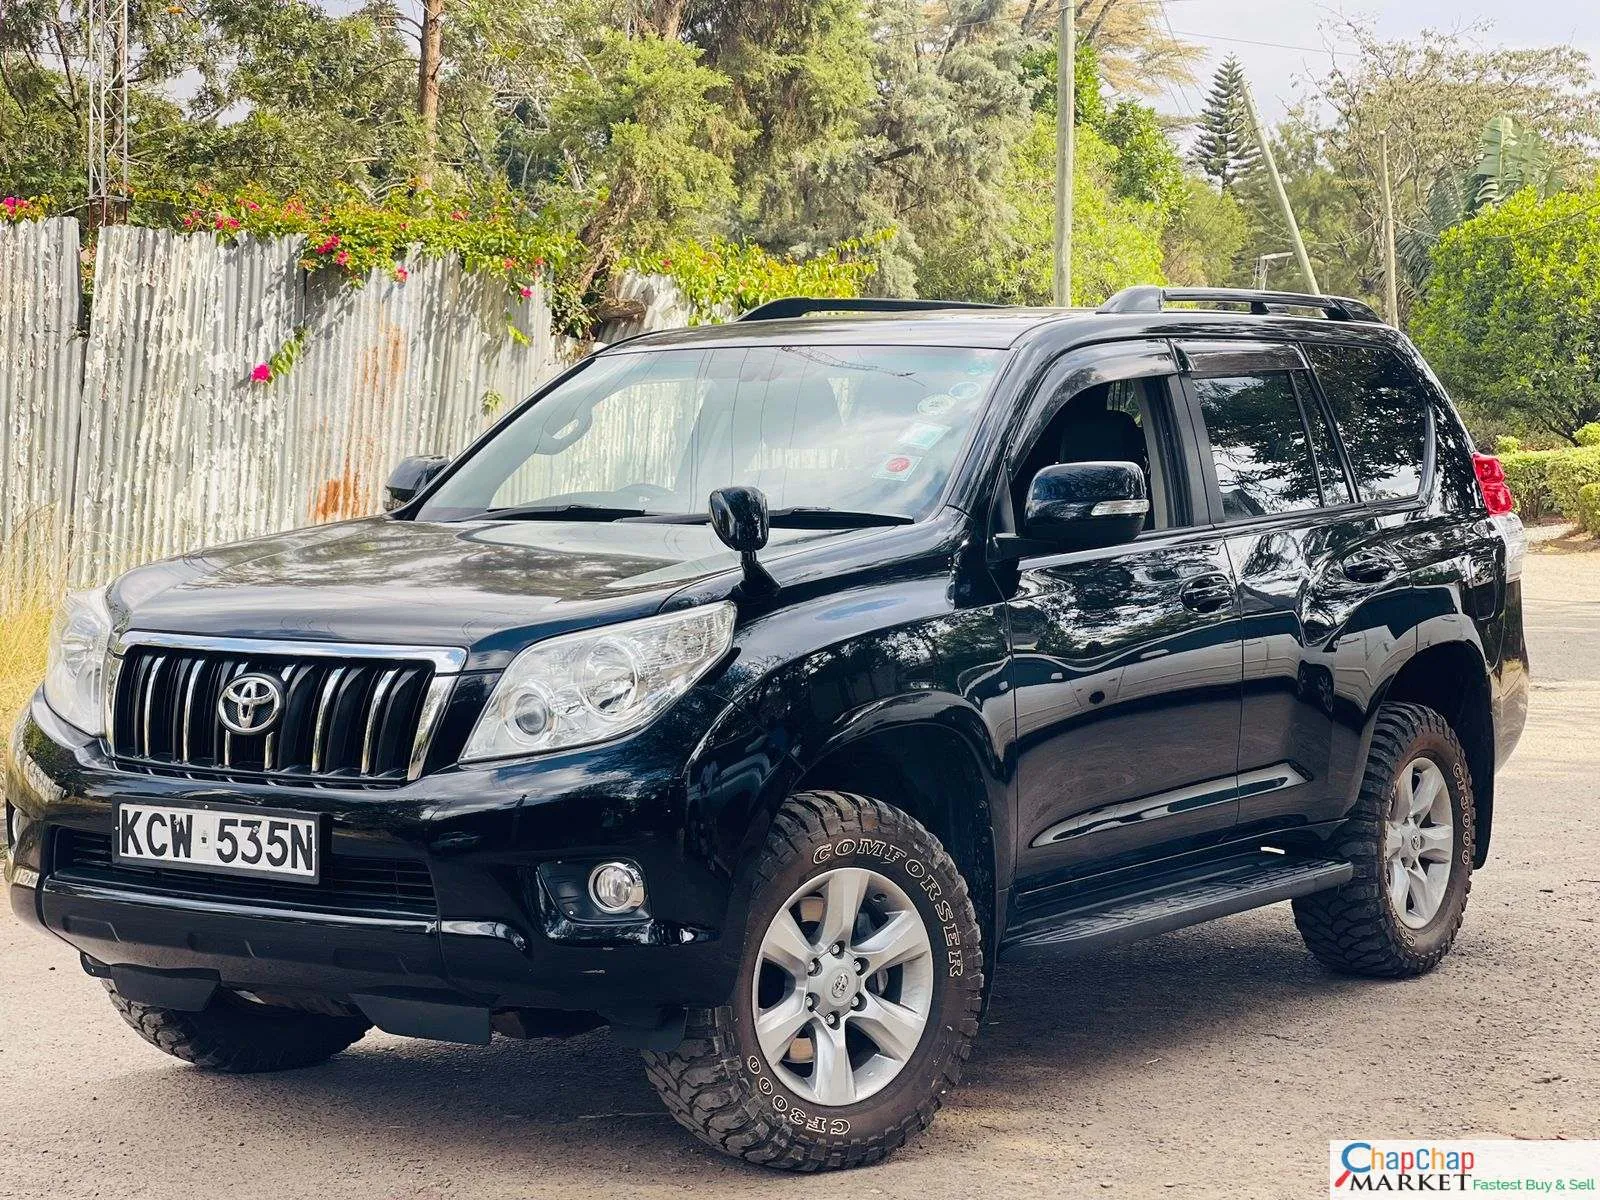 Toyota Prado Kenya j150 🔥 with SUNROOF You Pay 30% Deposit Trade in OK Prado for sale in kenya hire purchase installments EXCLUSIVE (SOLD)